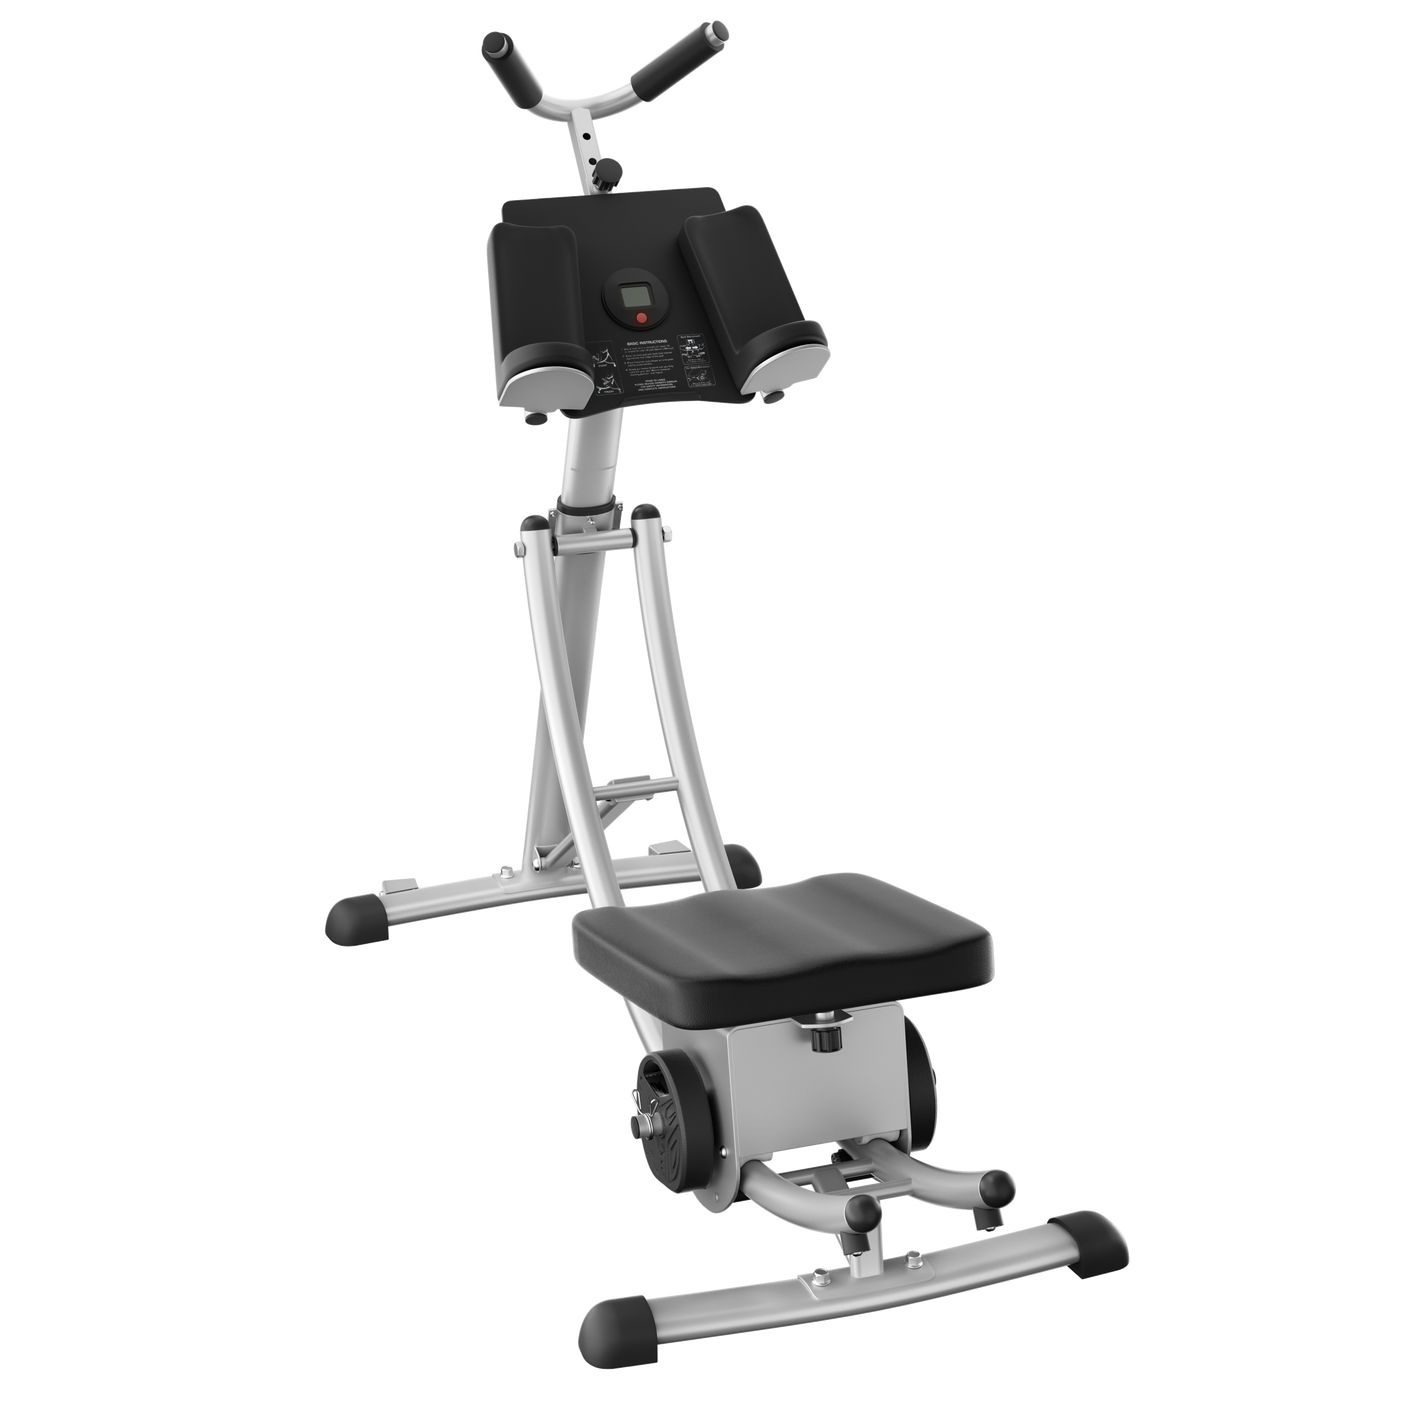 Abdominal Machine 500lbs Capacity Exercise Equipment for Home , Less Stress on Neck & Back, Abdominal/Core Fitness Equipment